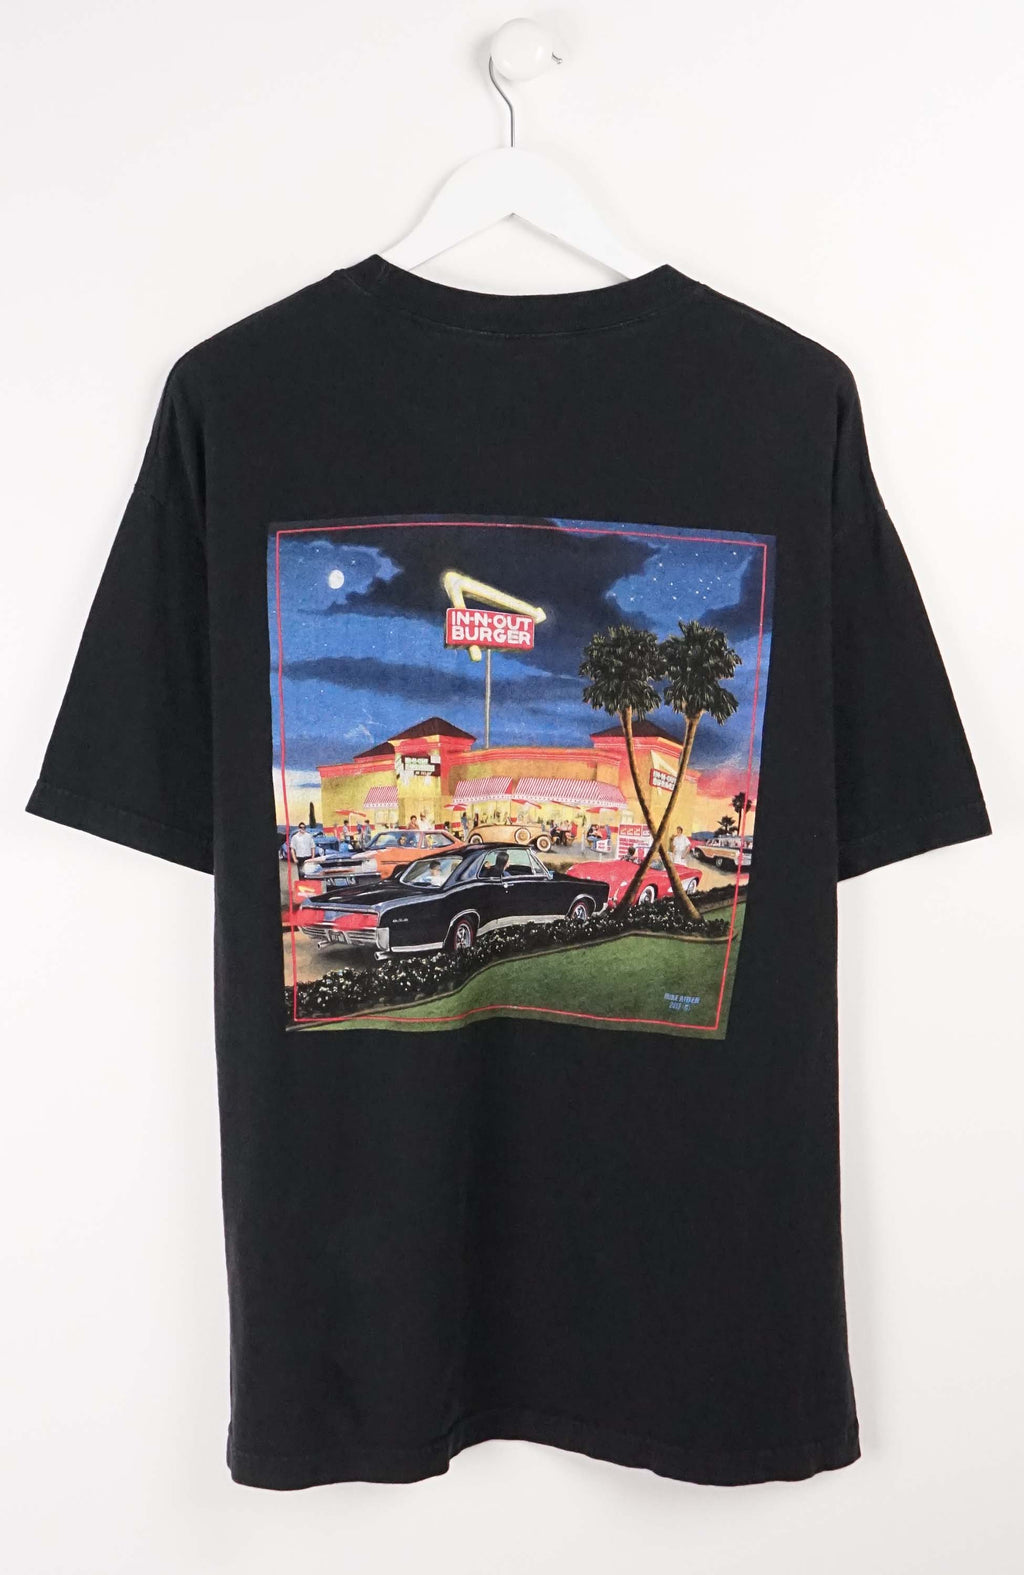 VINTAGE IN-N-OUT T-SHIRT (XL)